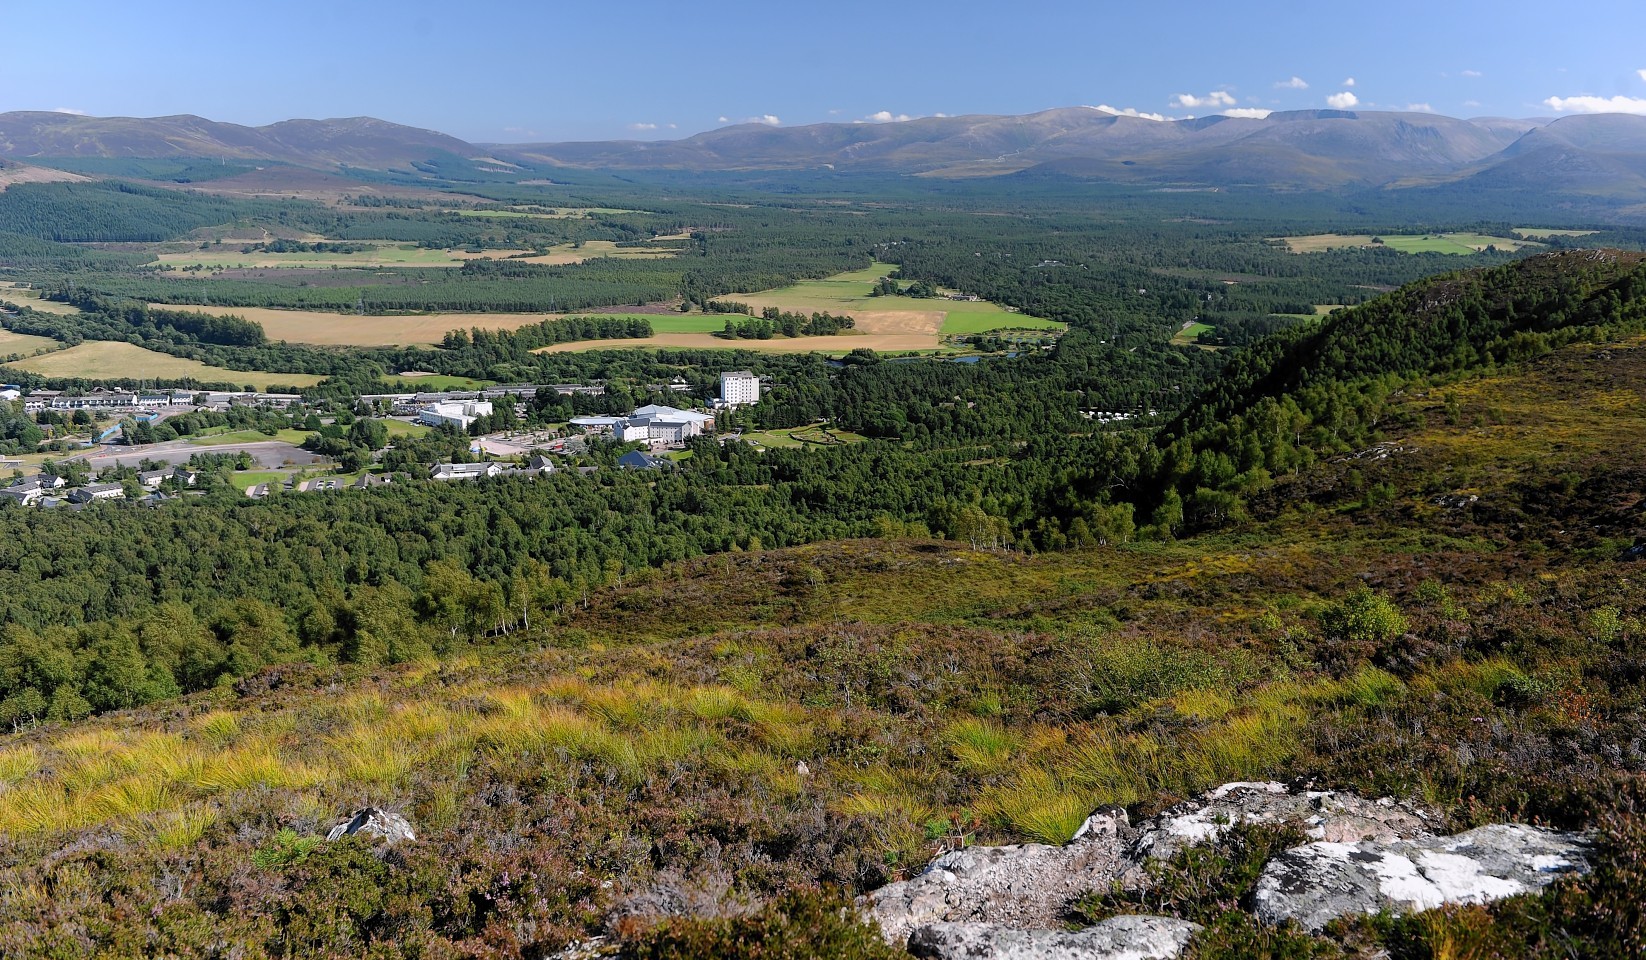 The site of the proposed An Camas Mor village near Aviemore